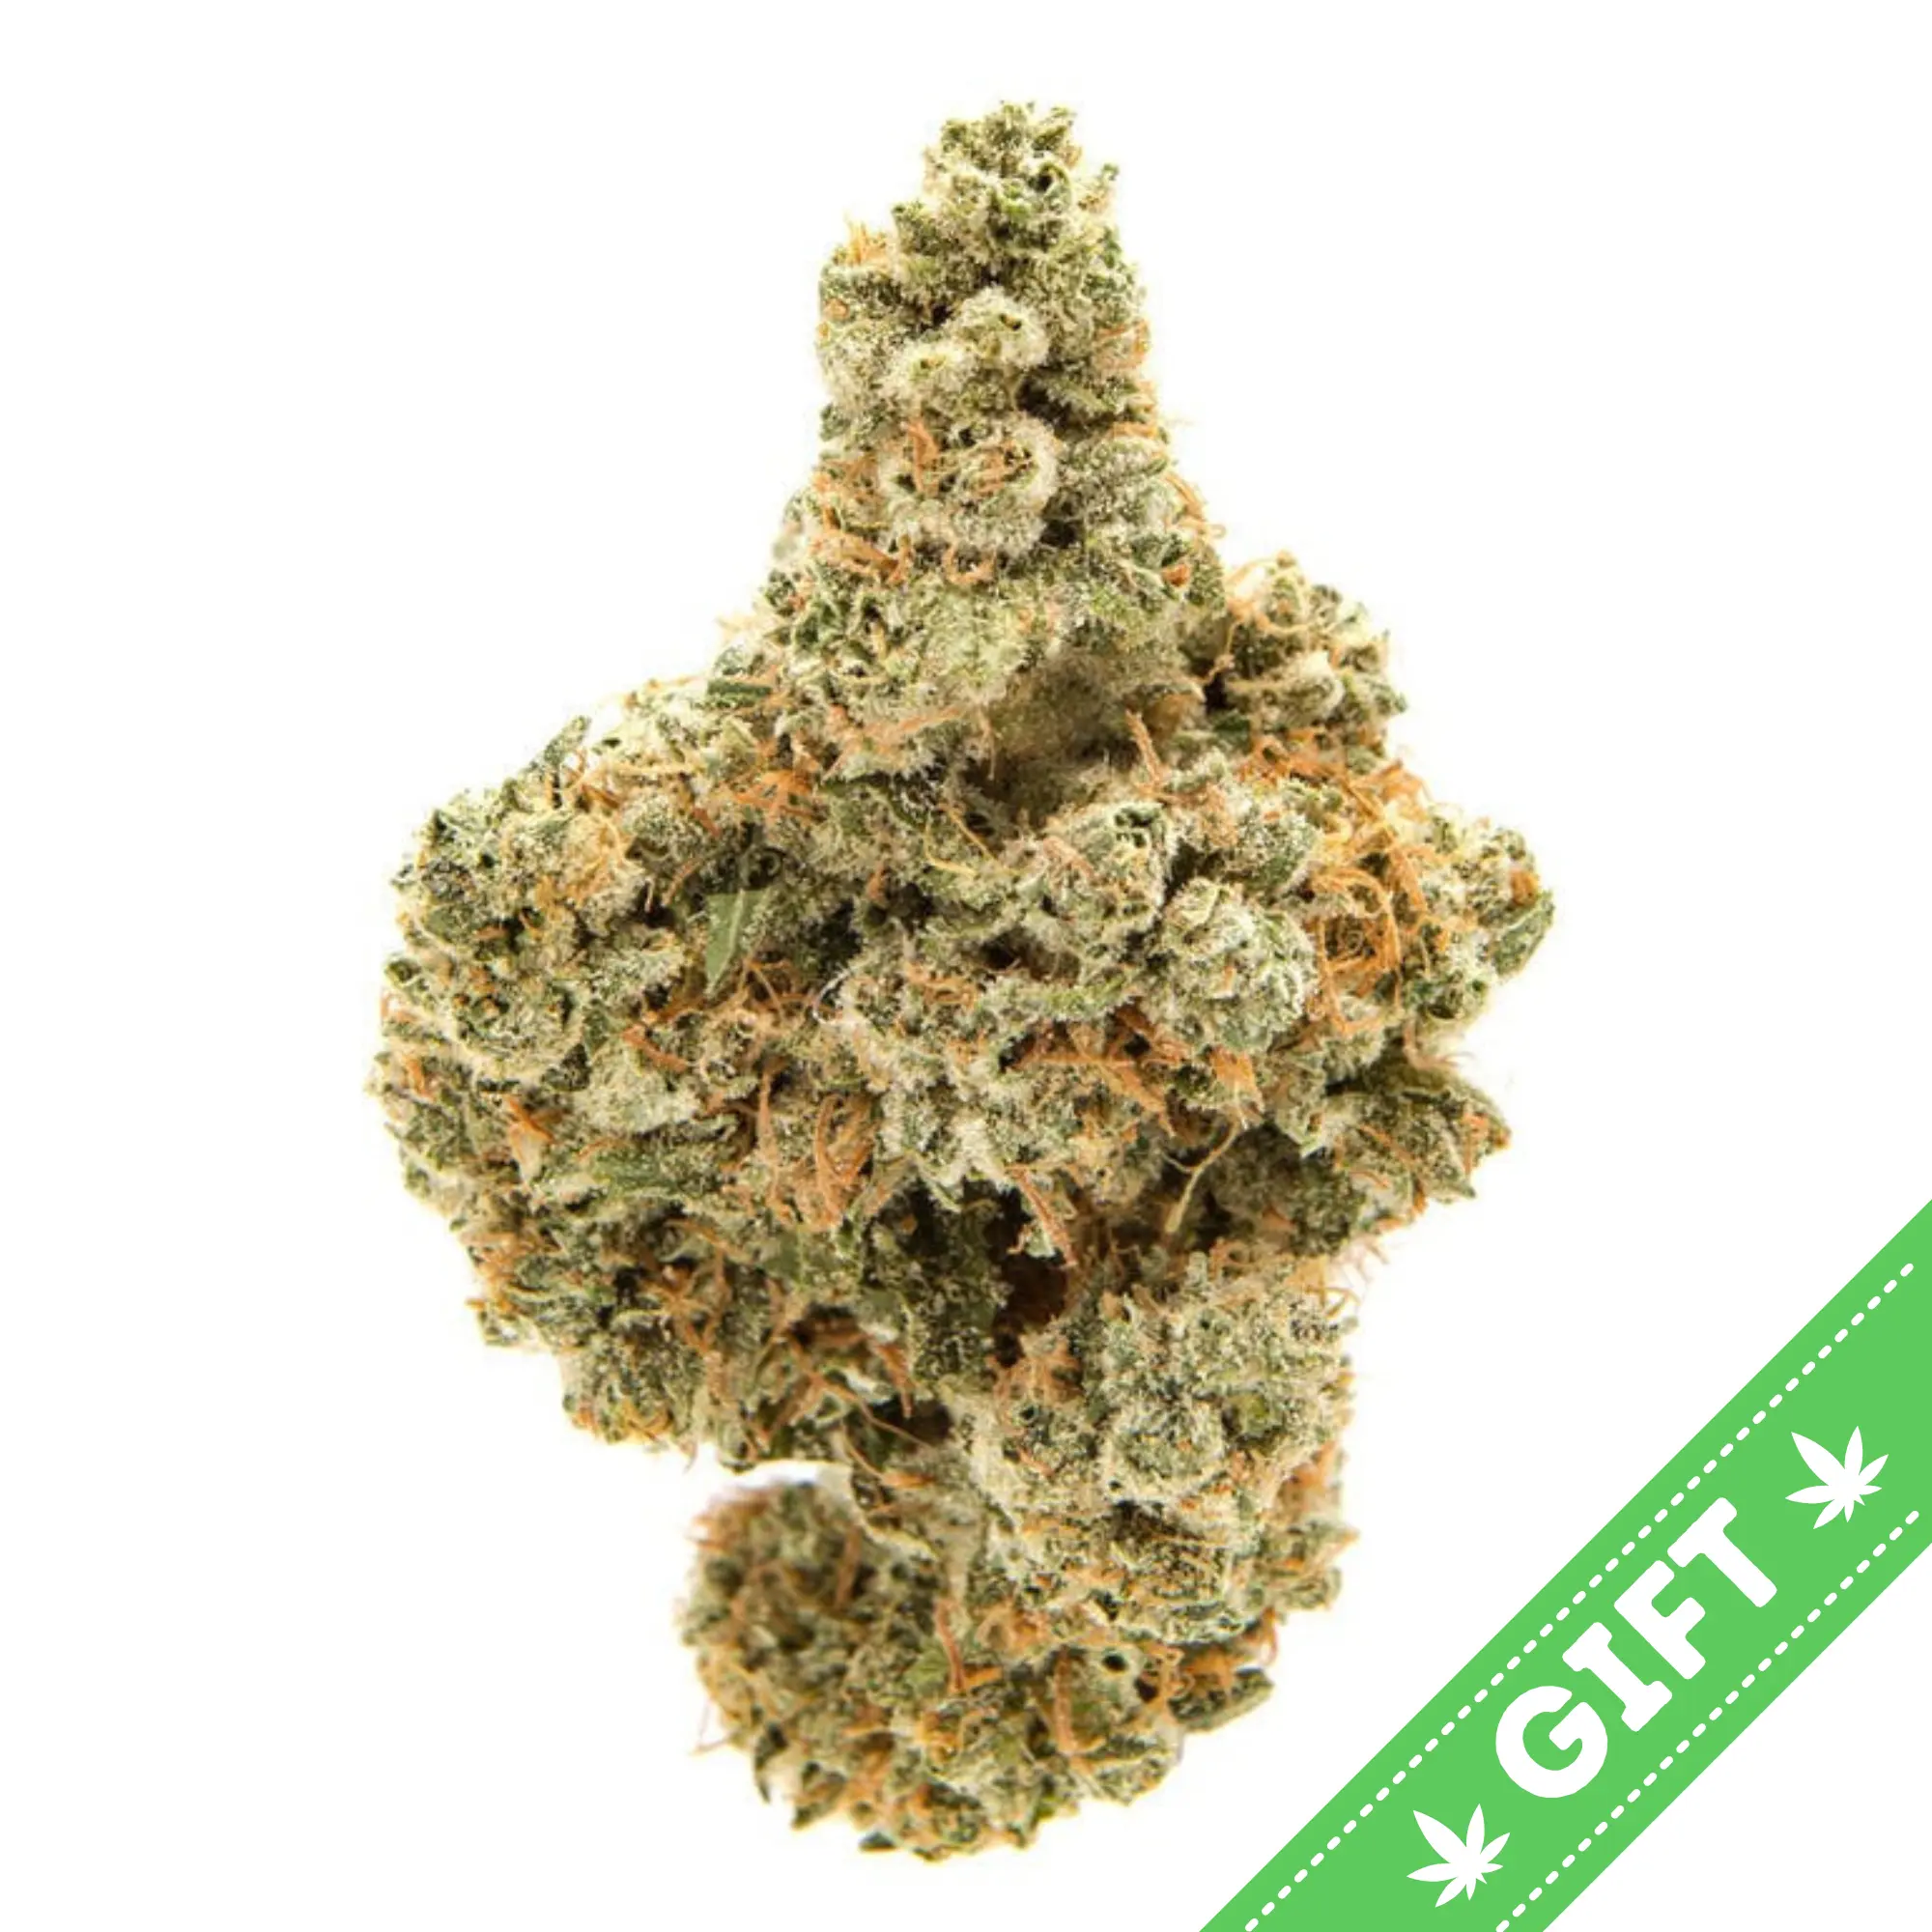 Giving Tree gifts Pineapple Express is a sativa-dominant hybrid marijuana strain made by crossing Trainwreck with Hawaiian.